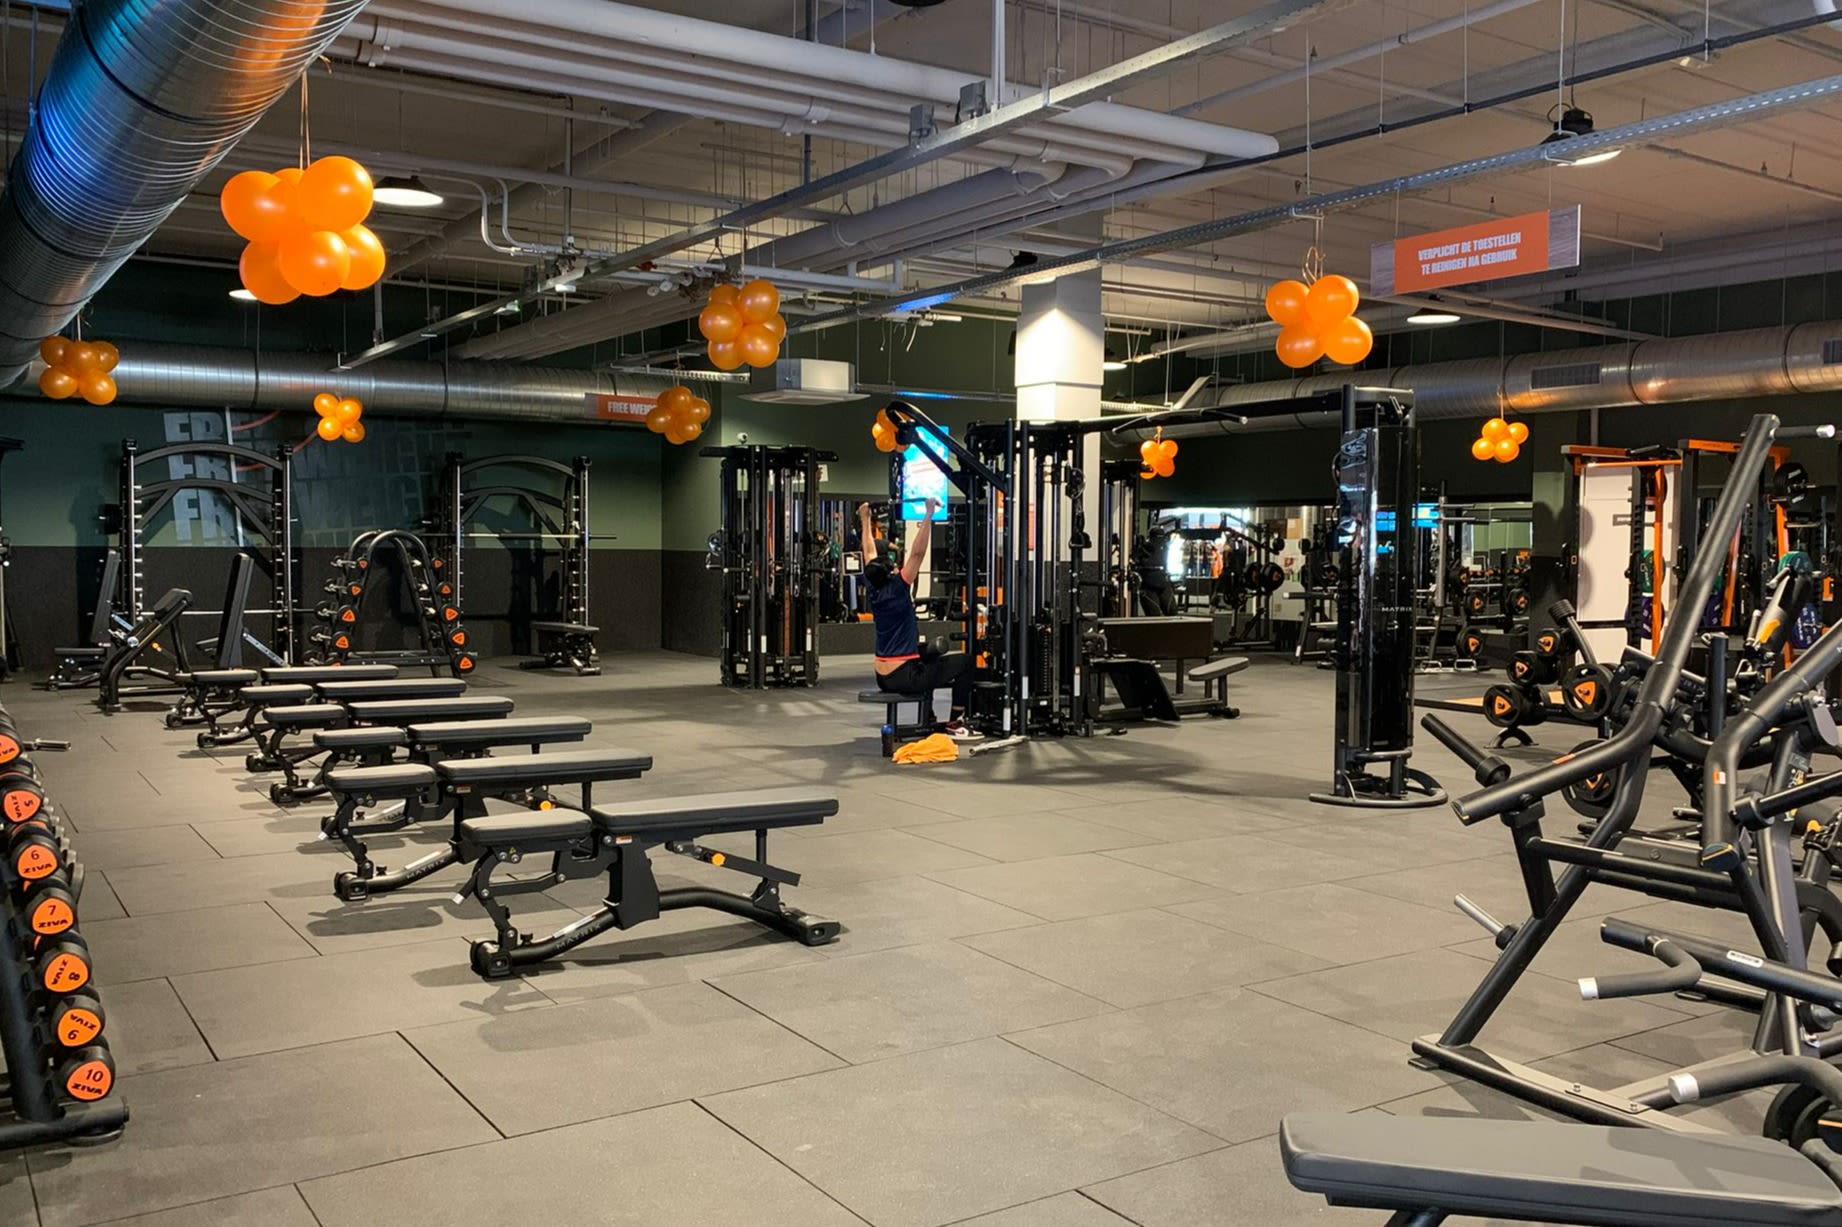 Basic Fit - Bos en Lommerplein 24/7: Reviews and Book on ClassPass